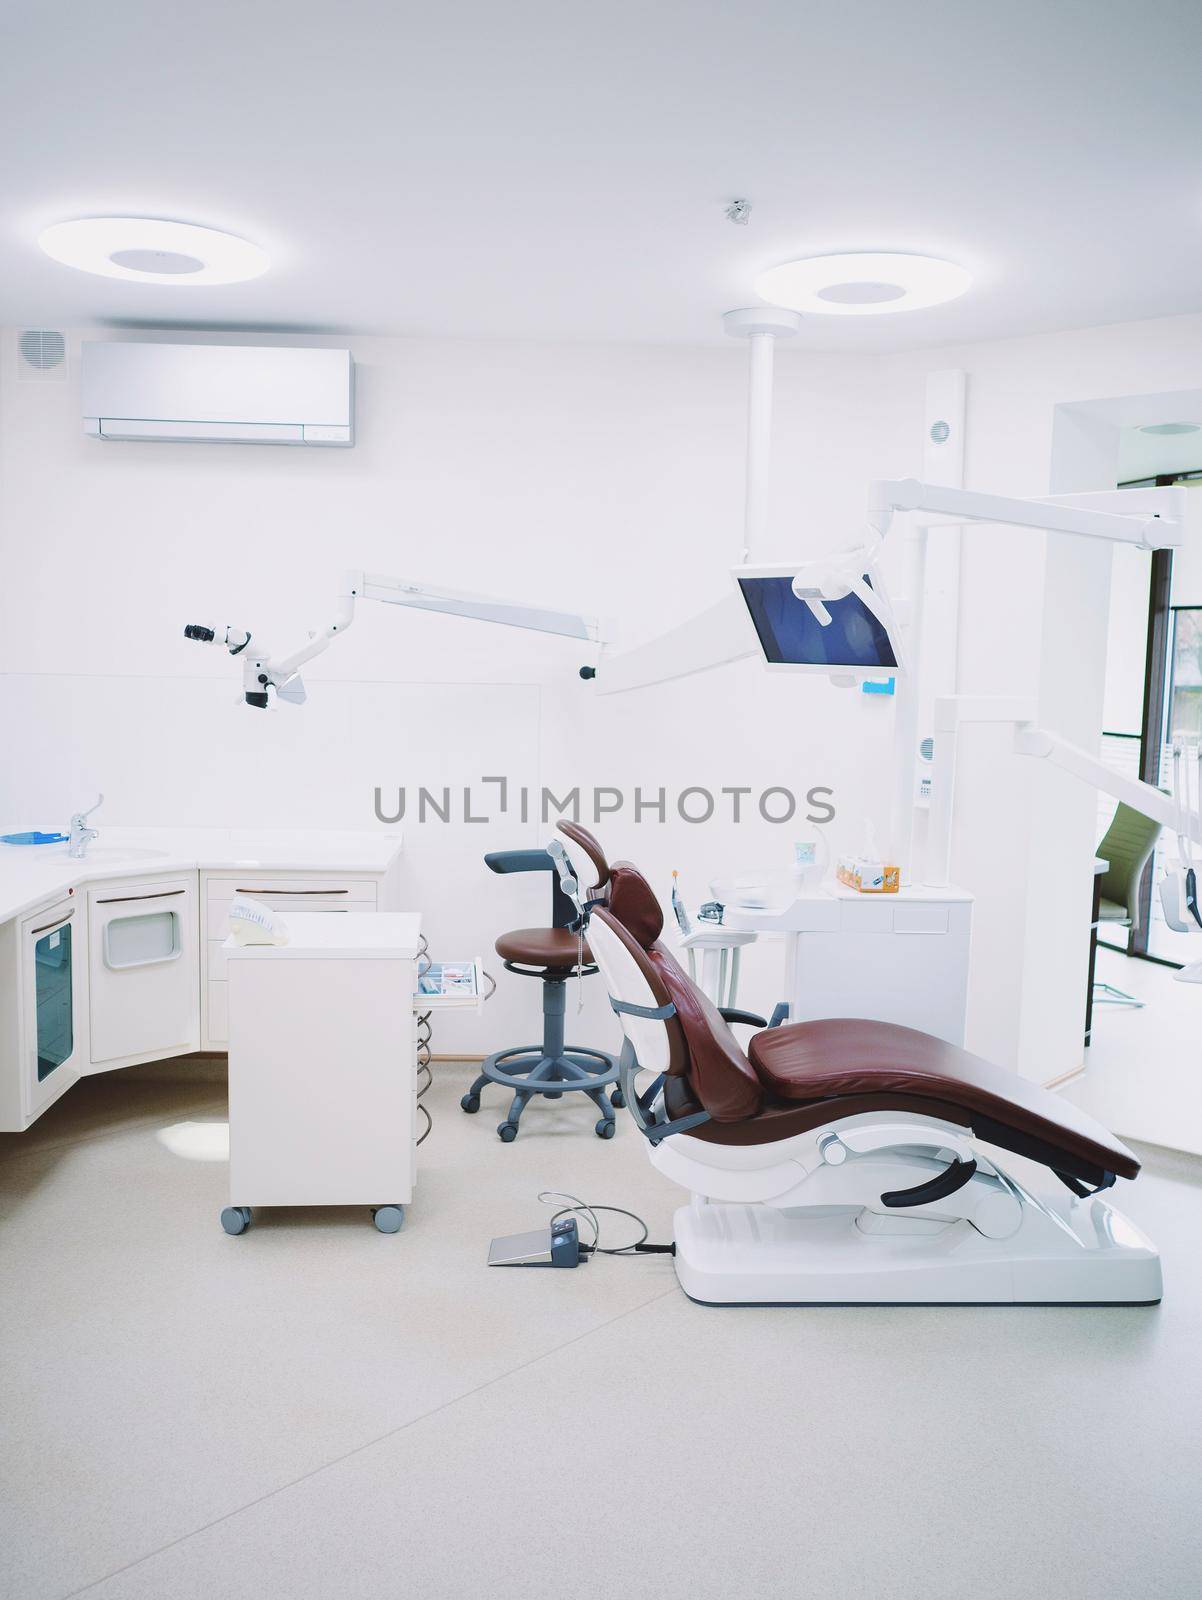 Modern dental office. Brown leather chair and other accessories used by dentists in white medic light by kristina_kokhanova